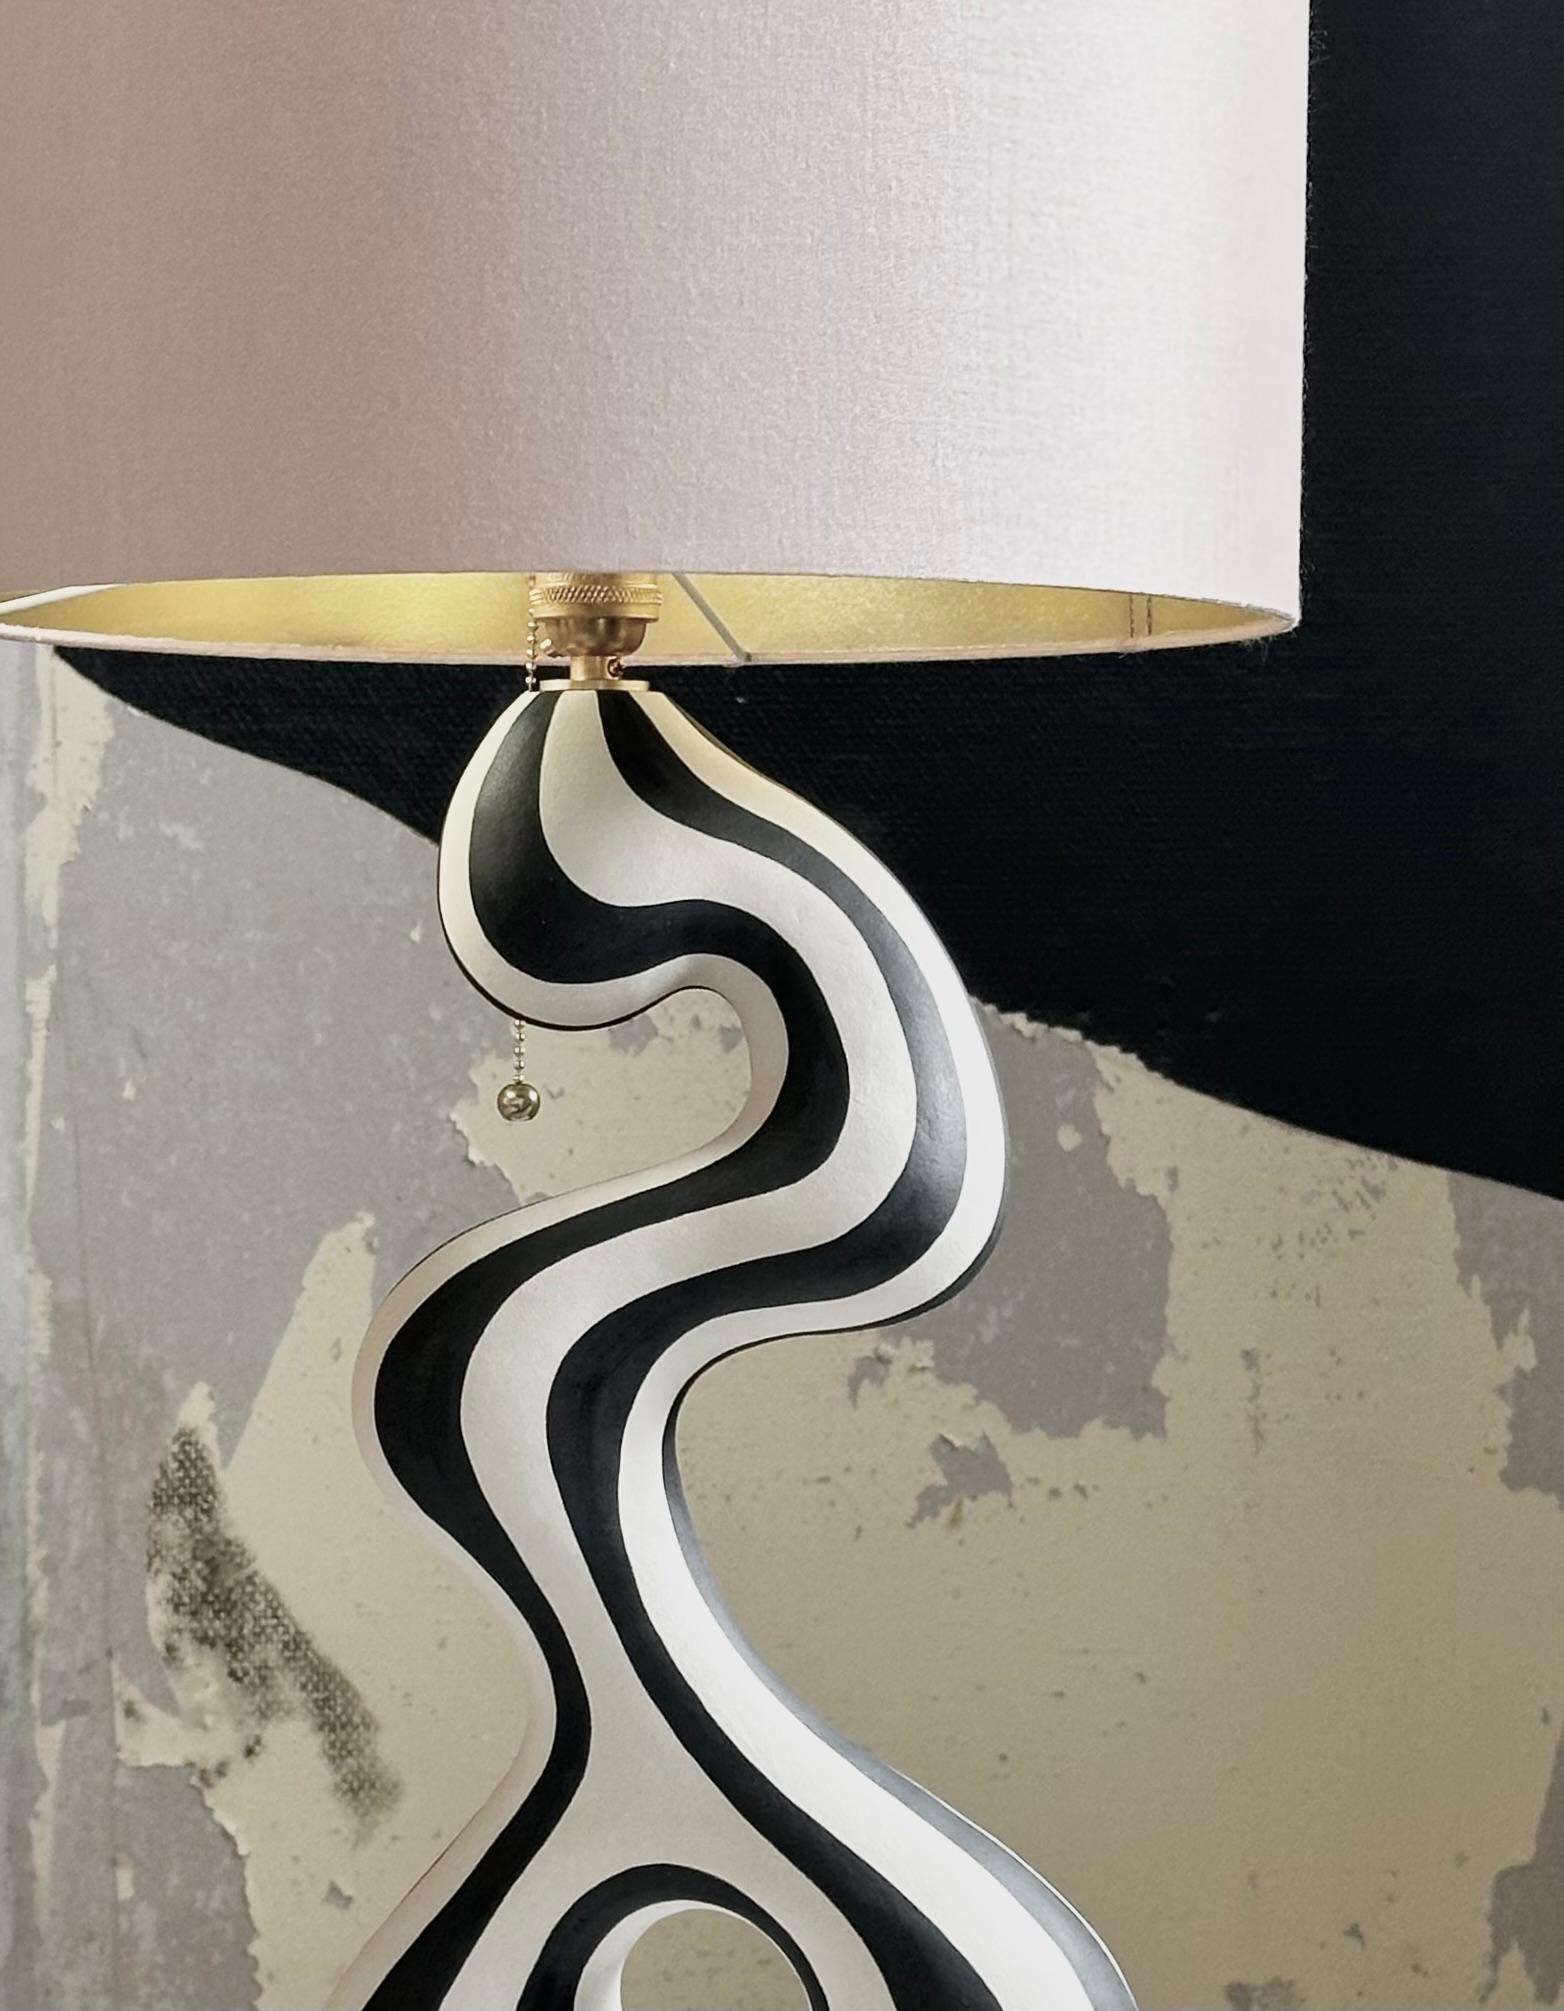 Crafted by hand: ceramic table lamp by Norwegian artist Jossolini 2